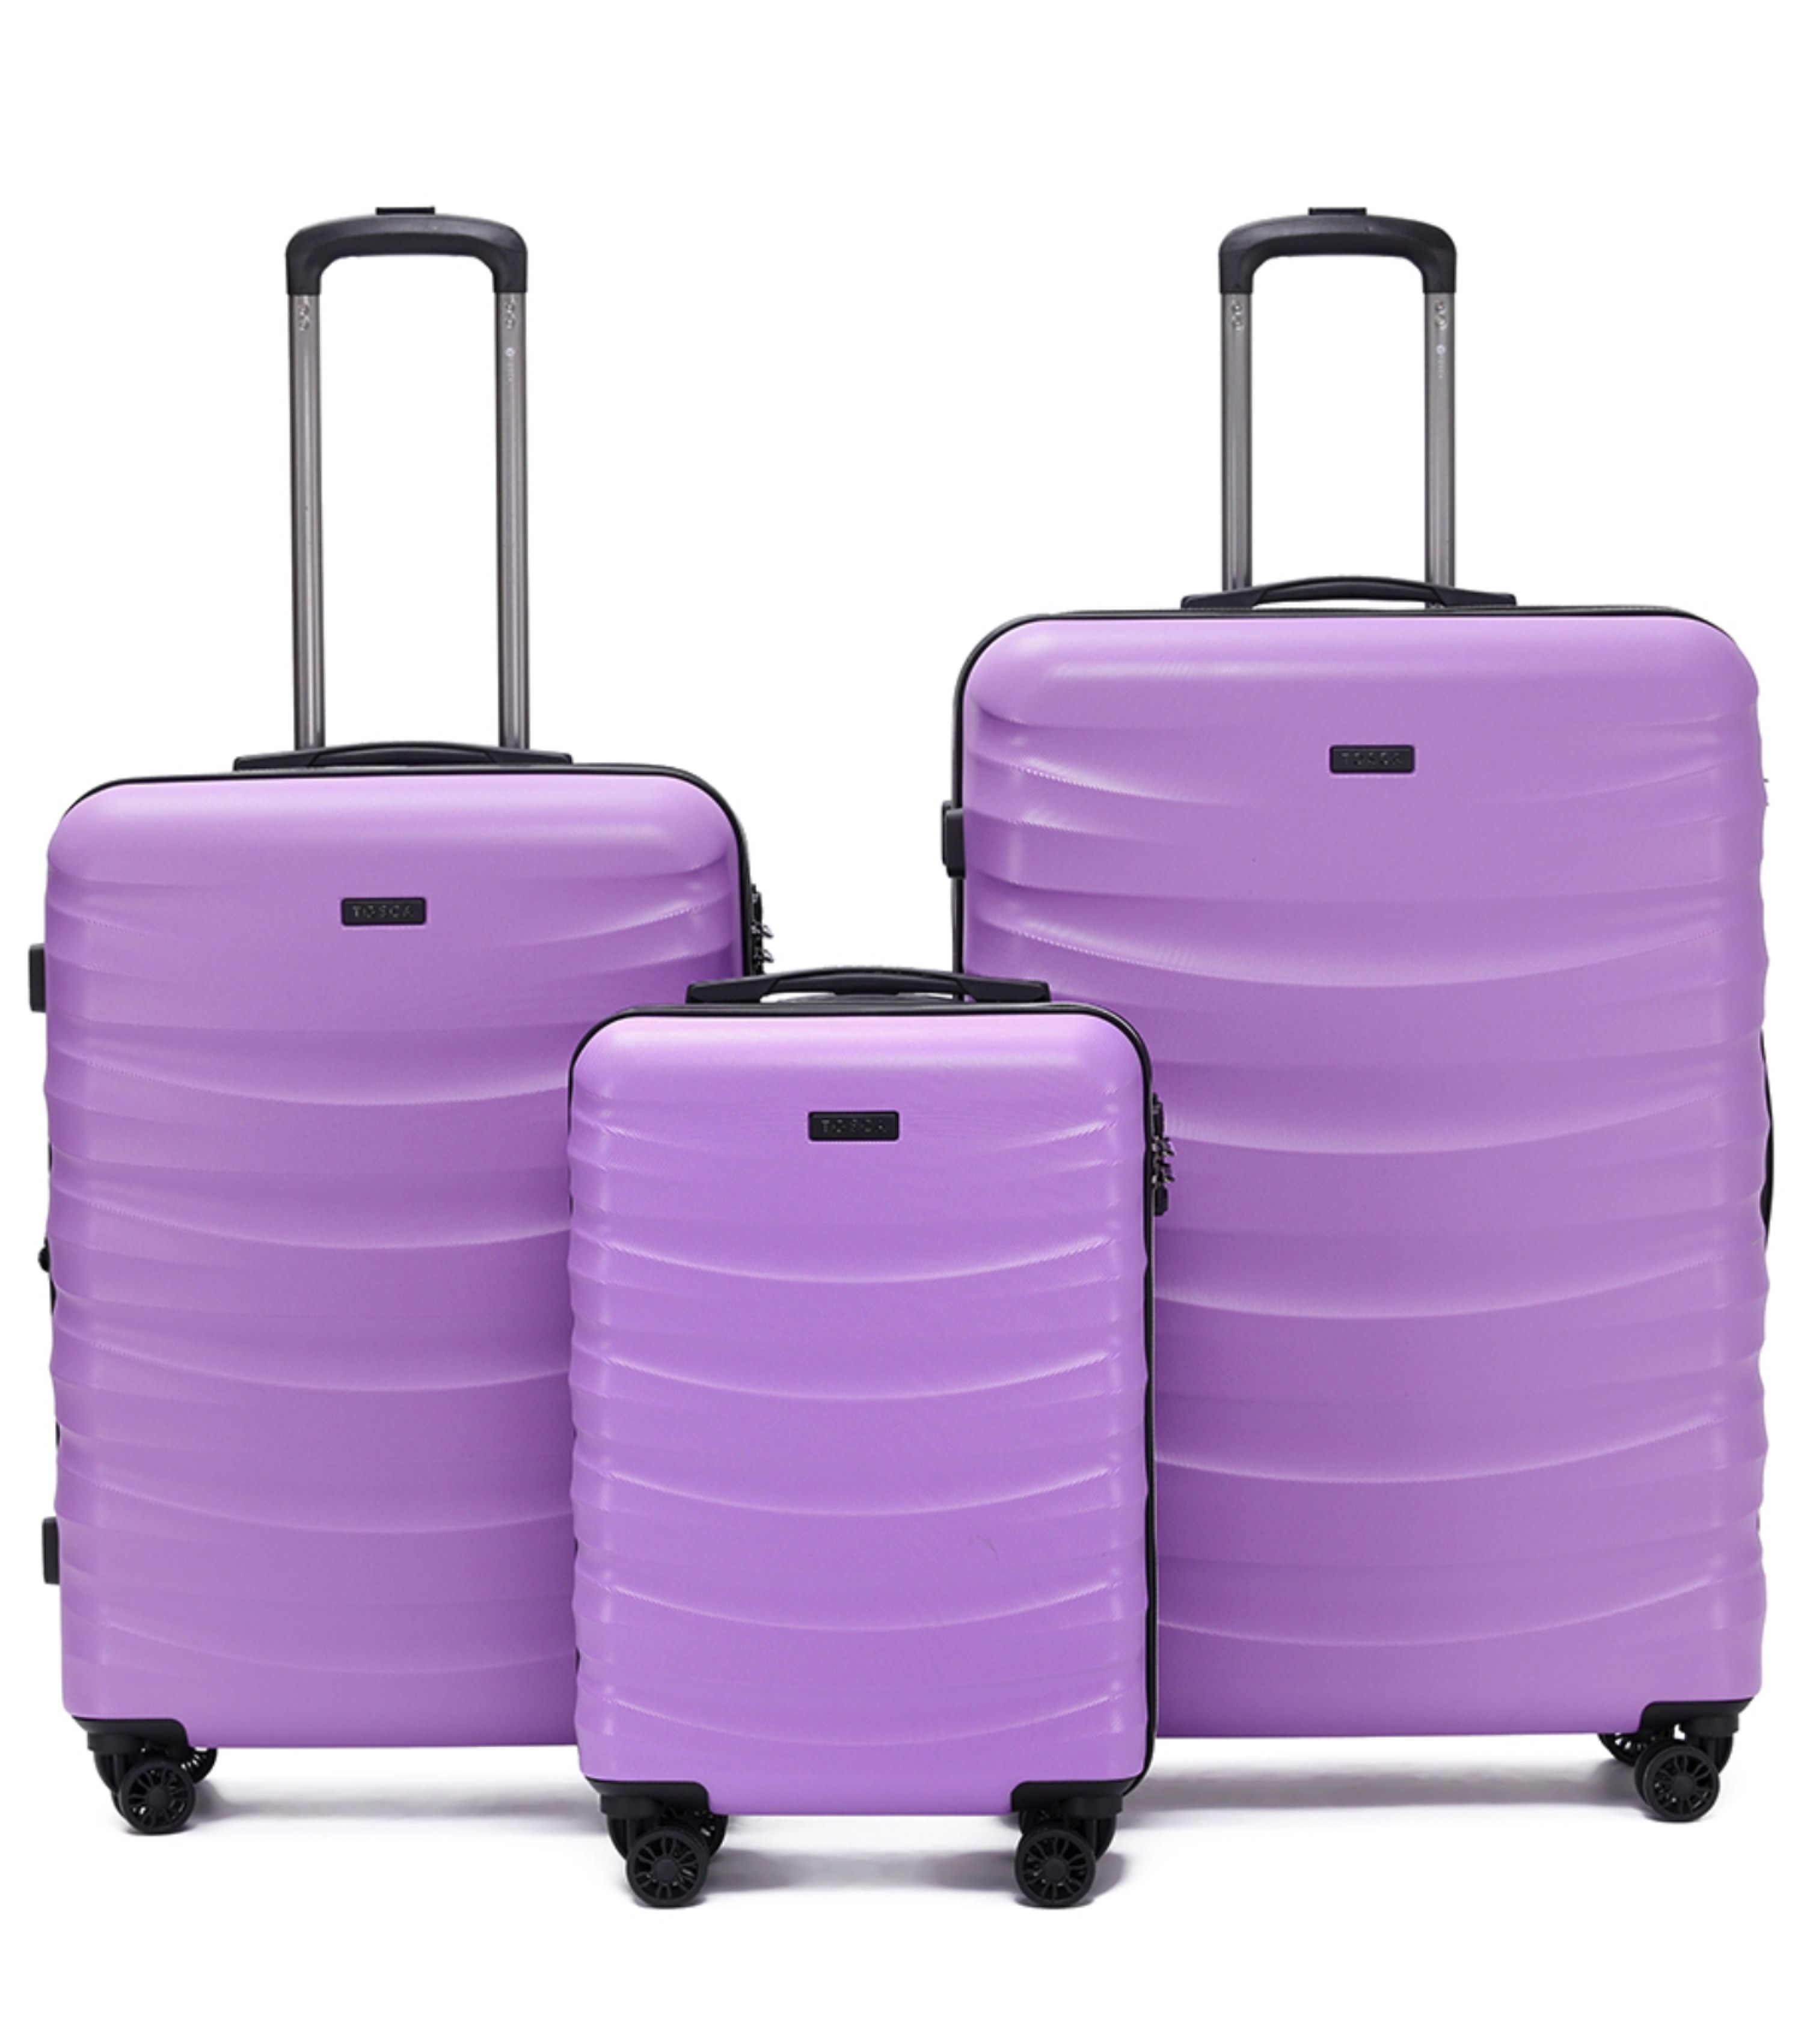 Tosca Interstellar 4-Wheel Expandable Luggage Set of 3 - Violet (Small ...